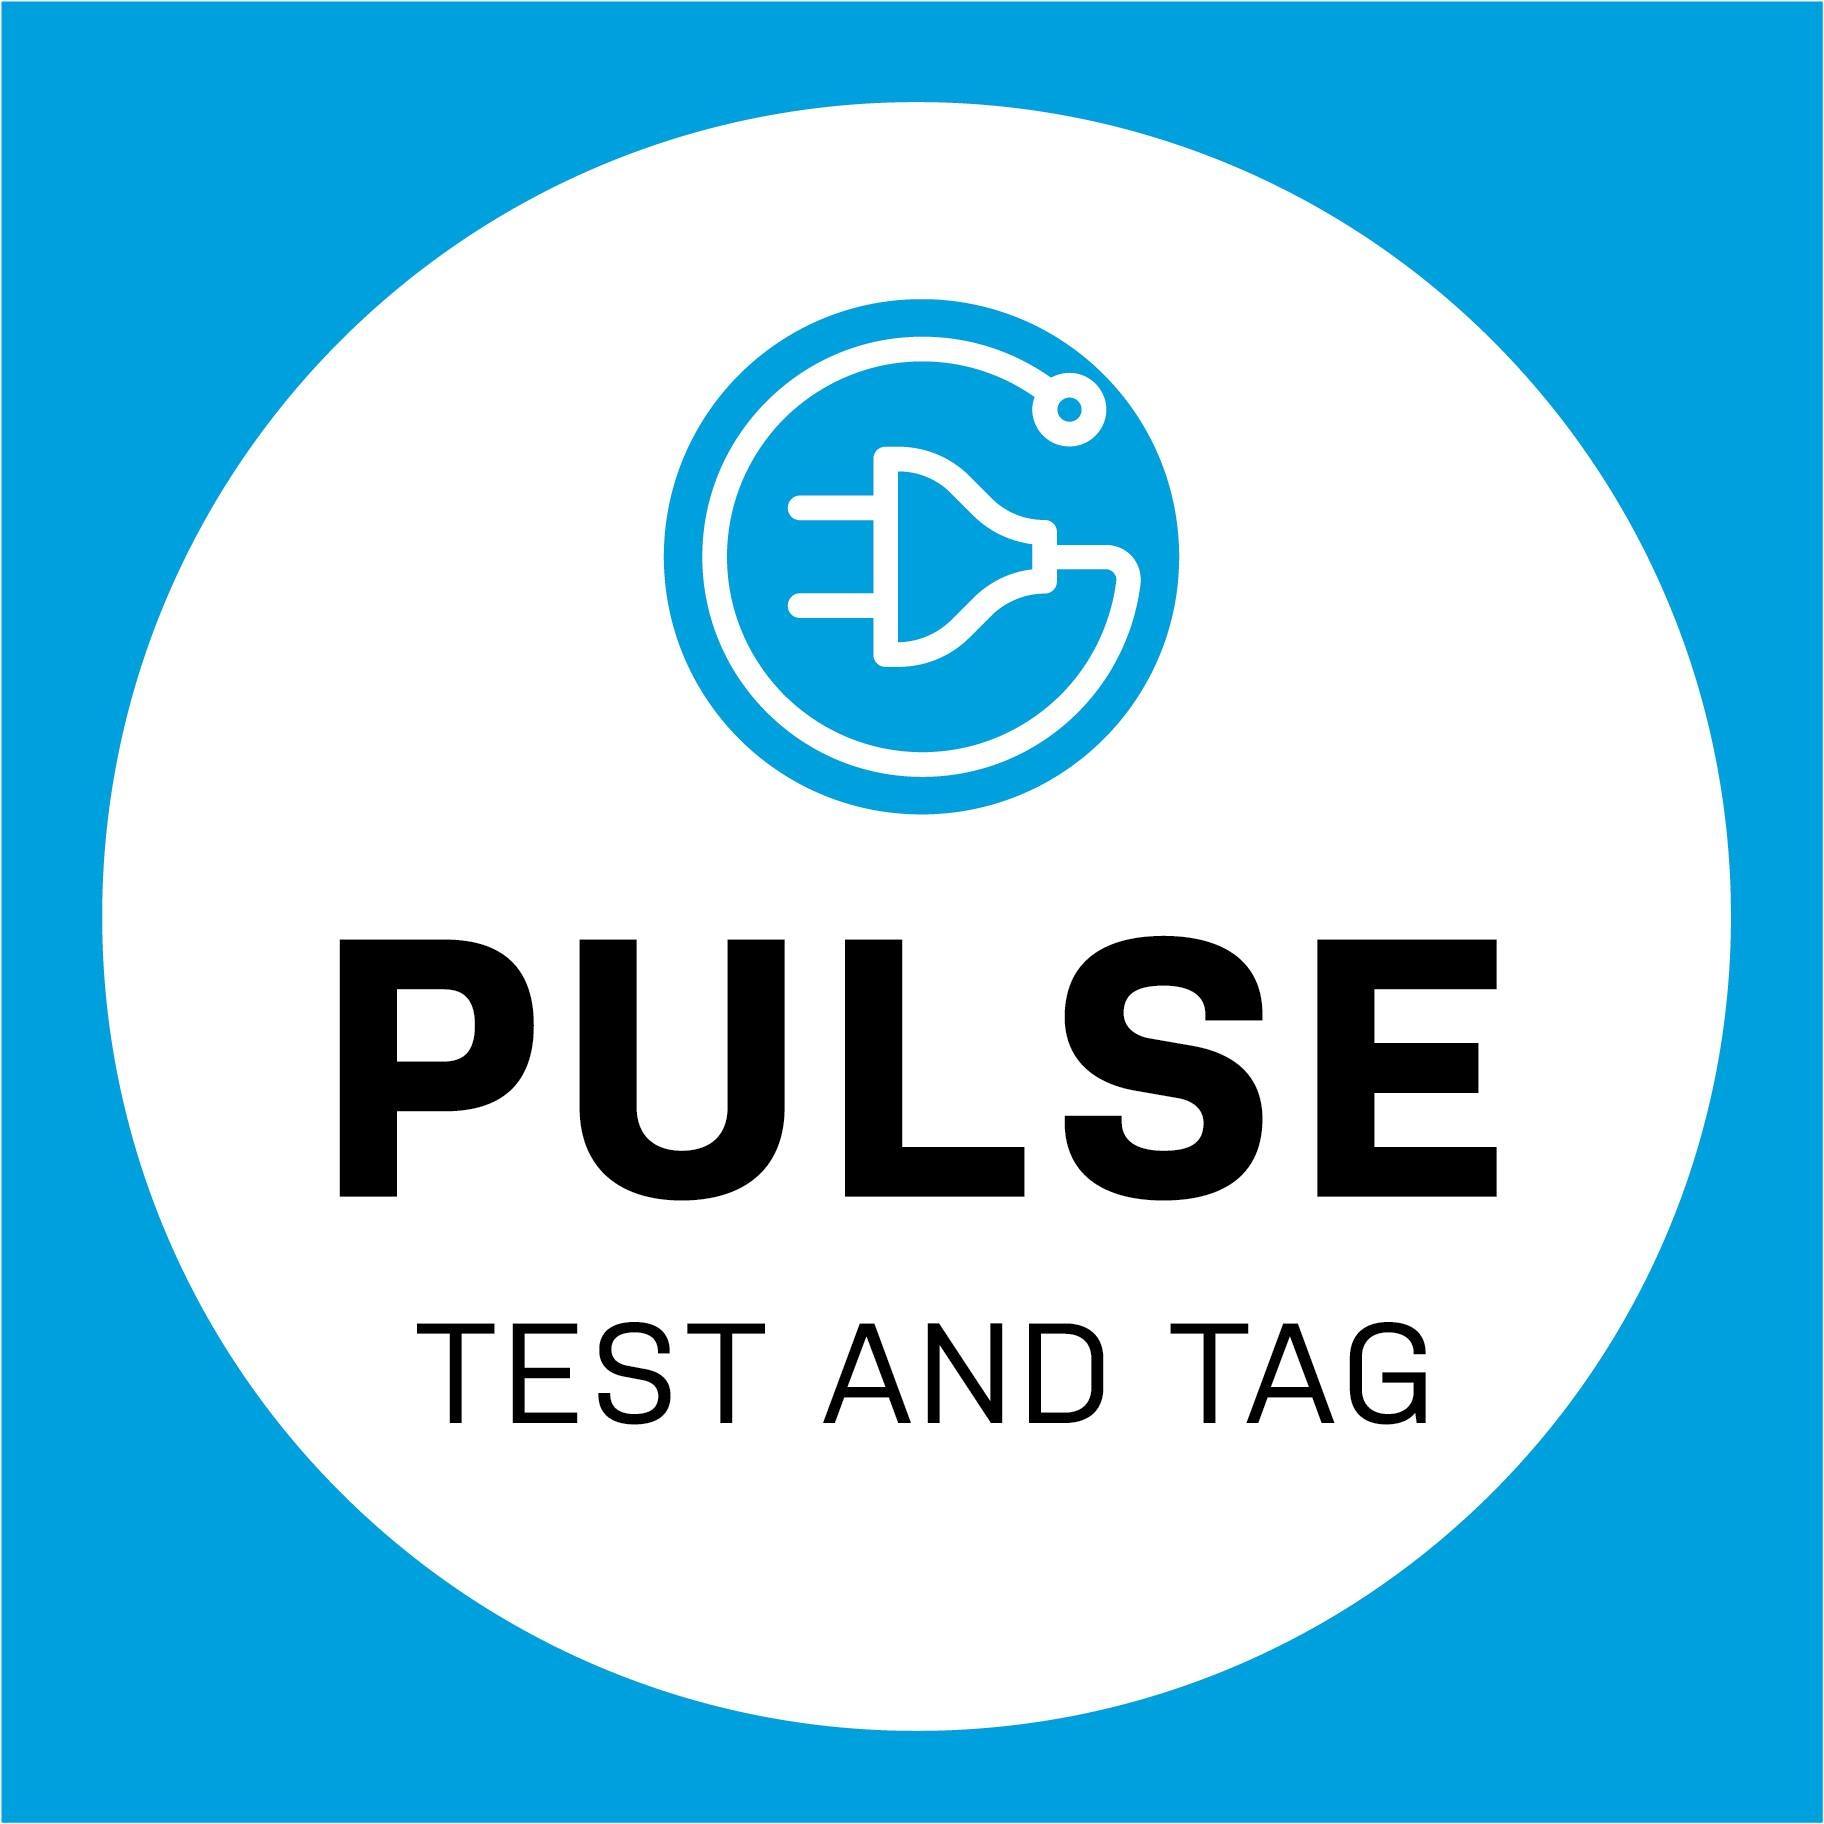 Pulse Test and Tag